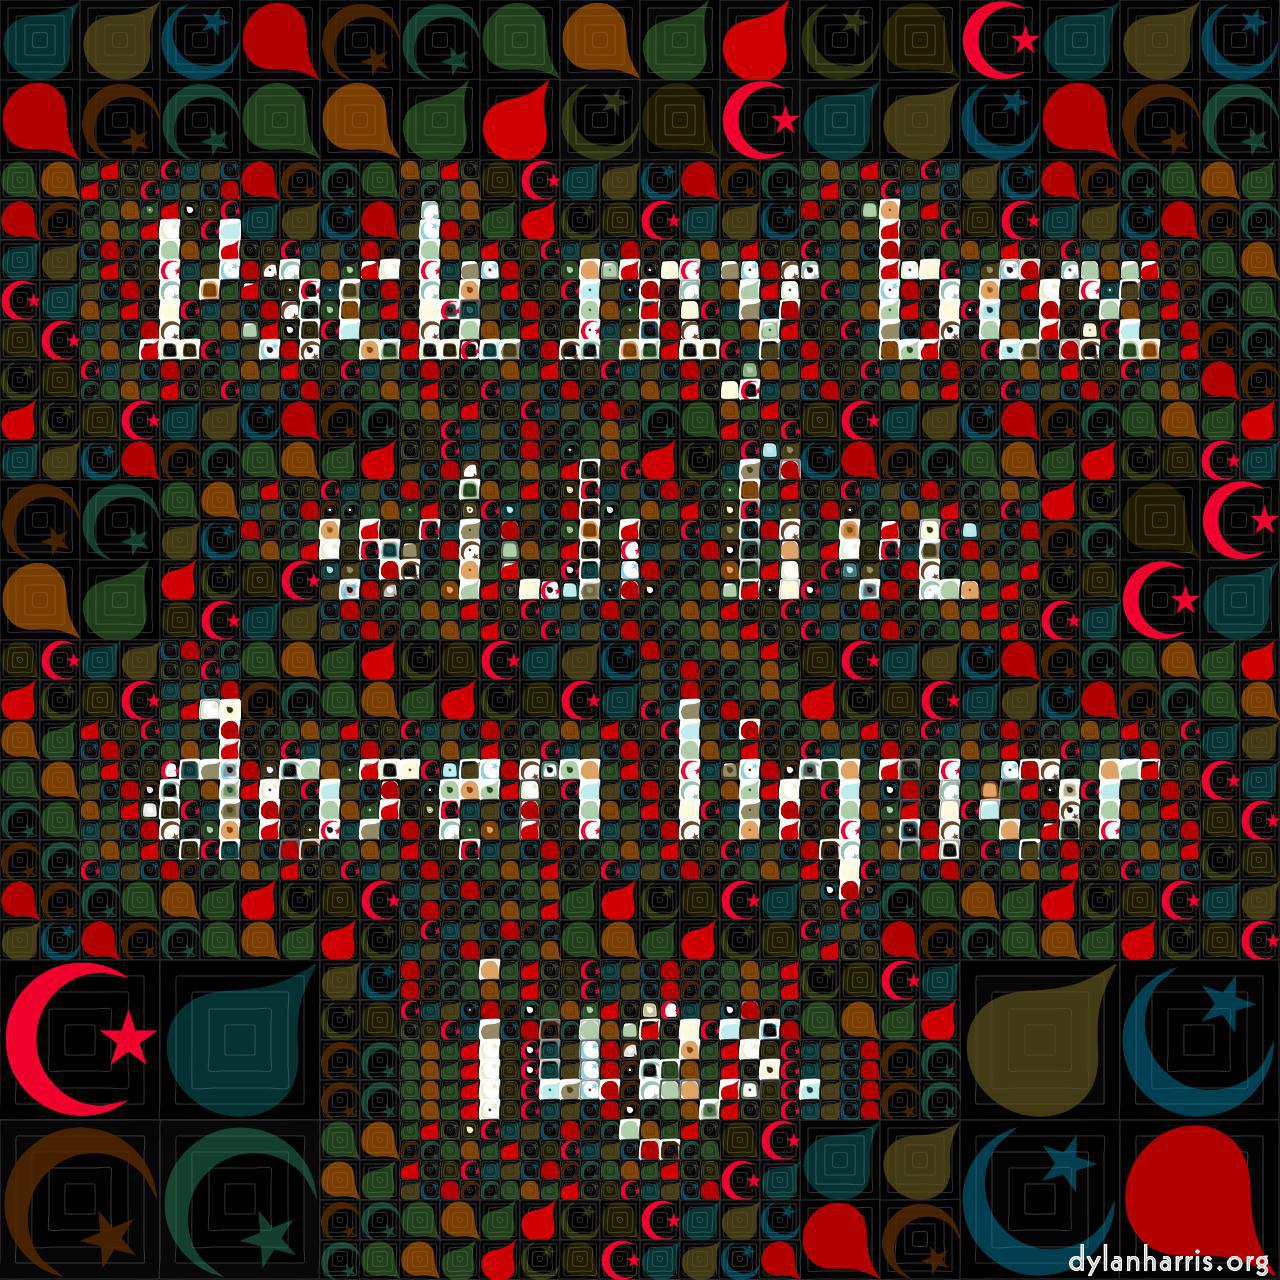 image: mosaic - image folder - try your own images :: alpha png—original colours of images